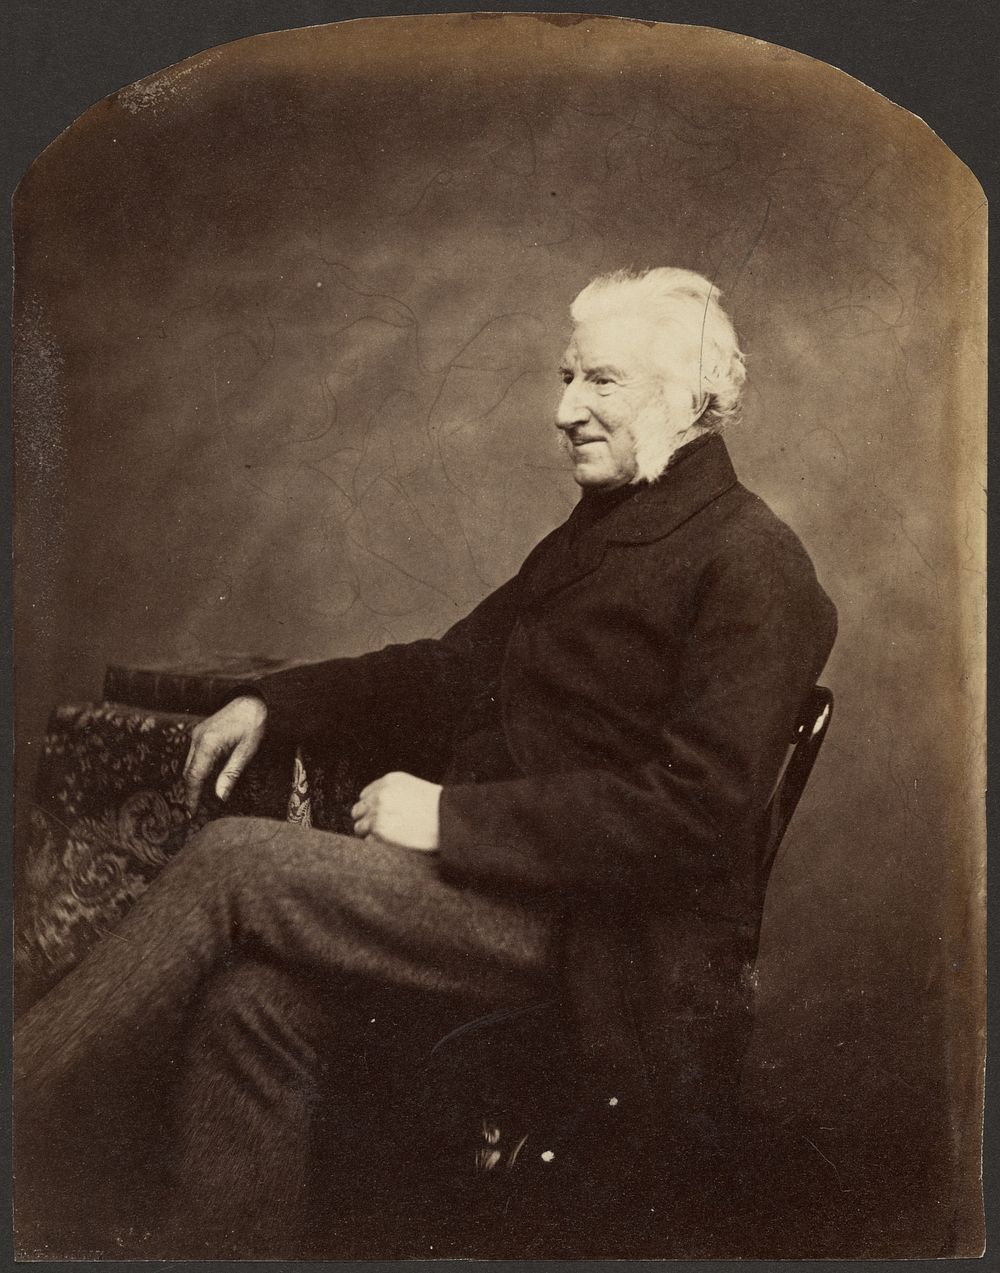 Portrait of a Man, 3/4 view by Roger Fenton